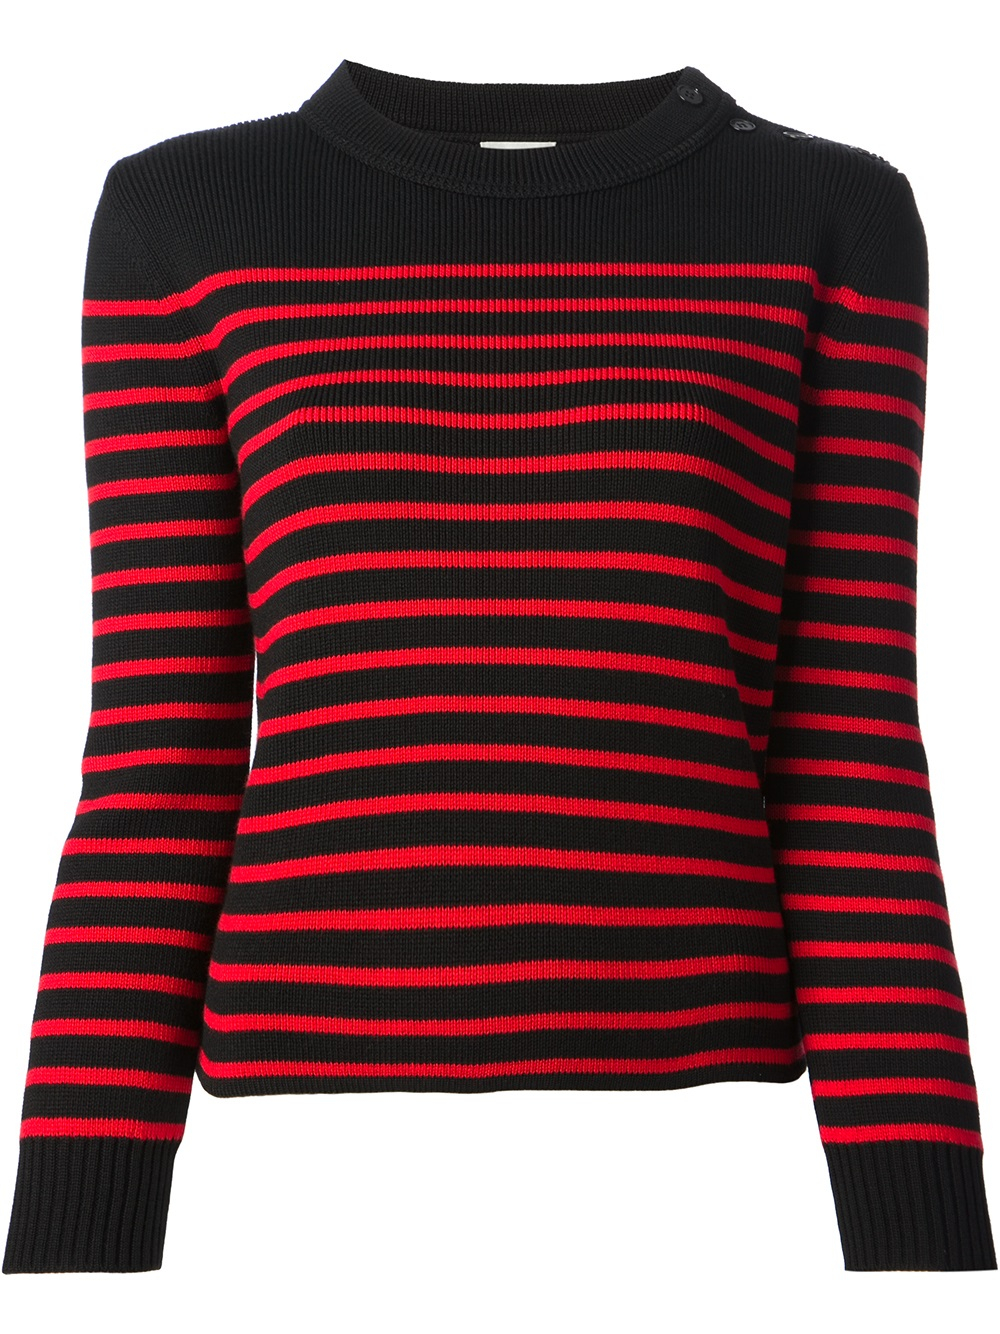 Lyst - Saint Laurent Sailor Knit Sweater in Red